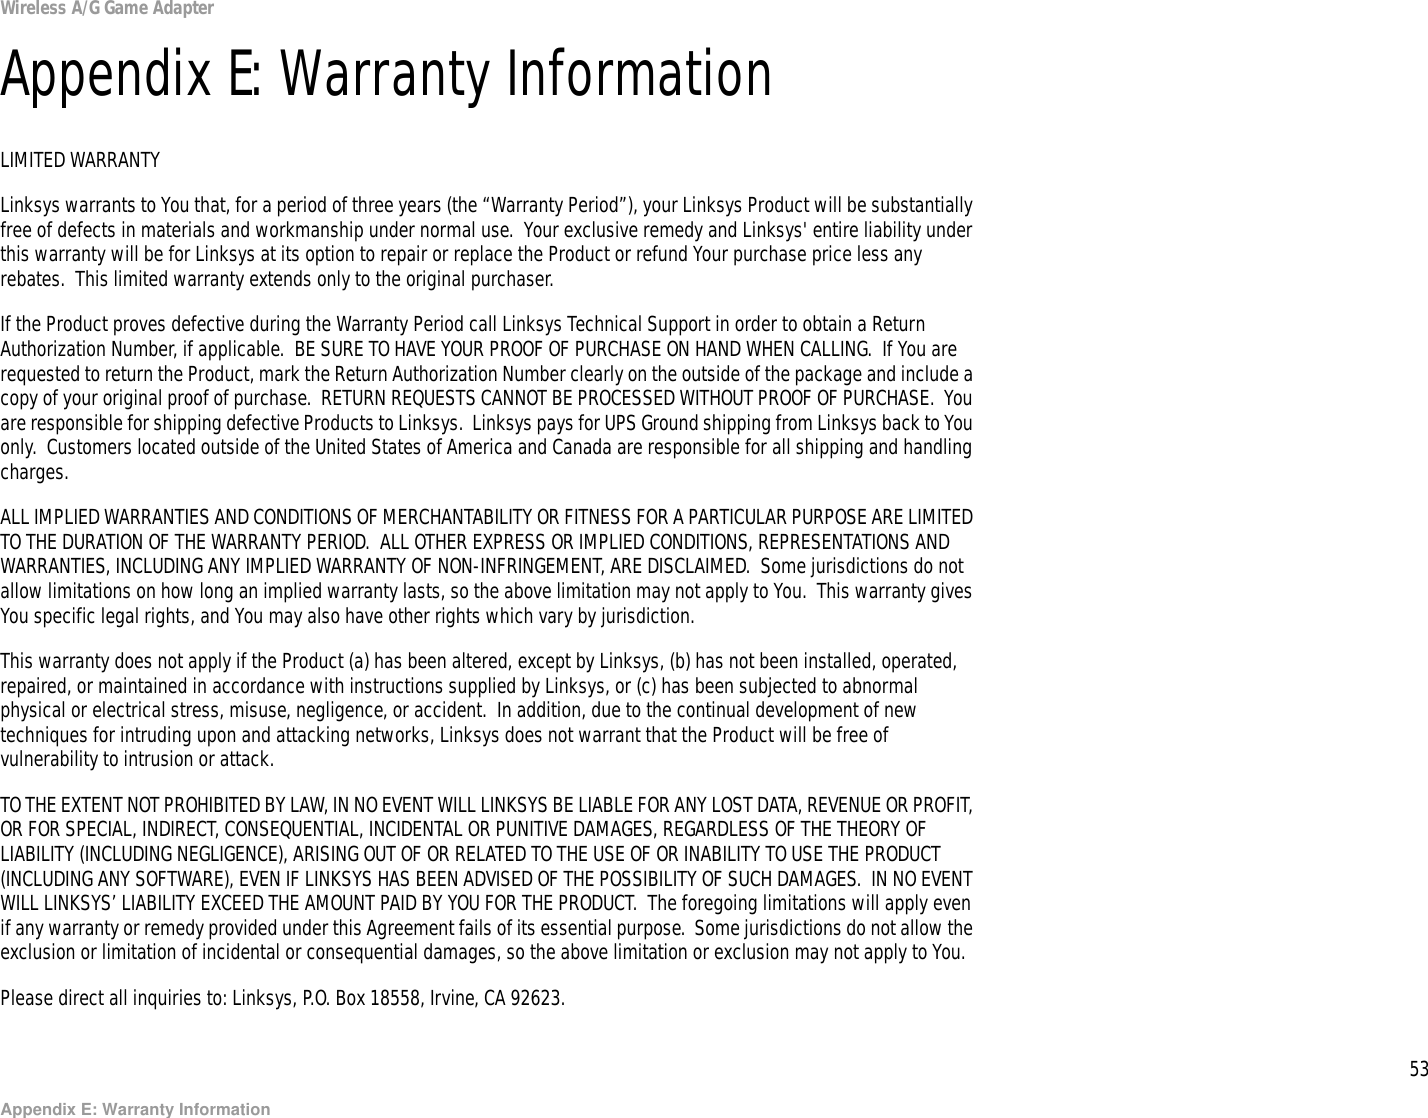 53Appendix E: Warranty InformationWireless A/G Game AdapterAppendix E: Warranty InformationLIMITED WARRANTYLinksys warrants to You that, for a period of three years (the “Warranty Period”), your Linksys Product will be substantially free of defects in materials and workmanship under normal use.  Your exclusive remedy and Linksys&apos; entire liability under this warranty will be for Linksys at its option to repair or replace the Product or refund Your purchase price less any rebates.  This limited warranty extends only to the original purchaser.  If the Product proves defective during the Warranty Period call Linksys Technical Support in order to obtain a Return Authorization Number, if applicable.  BE SURE TO HAVE YOUR PROOF OF PURCHASE ON HAND WHEN CALLING.  If You are requested to return the Product, mark the Return Authorization Number clearly on the outside of the package and include a copy of your original proof of purchase.  RETURN REQUESTS CANNOT BE PROCESSED WITHOUT PROOF OF PURCHASE.  You are responsible for shipping defective Products to Linksys.  Linksys pays for UPS Ground shipping from Linksys back to You only.  Customers located outside of the United States of America and Canada are responsible for all shipping and handling charges.ALL IMPLIED WARRANTIES AND CONDITIONS OF MERCHANTABILITY OR FITNESS FOR A PARTICULAR PURPOSE ARE LIMITED TO THE DURATION OF THE WARRANTY PERIOD.  ALL OTHER EXPRESS OR IMPLIED CONDITIONS, REPRESENTATIONS AND WARRANTIES, INCLUDING ANY IMPLIED WARRANTY OF NON-INFRINGEMENT, ARE DISCLAIMED.  Some jurisdictions do not allow limitations on how long an implied warranty lasts, so the above limitation may not apply to You.  This warranty gives You specific legal rights, and You may also have other rights which vary by jurisdiction.This warranty does not apply if the Product (a) has been altered, except by Linksys, (b) has not been installed, operated, repaired, or maintained in accordance with instructions supplied by Linksys, or (c) has been subjected to abnormal physical or electrical stress, misuse, negligence, or accident.  In addition, due to the continual development of new techniques for intruding upon and attacking networks, Linksys does not warrant that the Product will be free of vulnerability to intrusion or attack.TO THE EXTENT NOT PROHIBITED BY LAW, IN NO EVENT WILL LINKSYS BE LIABLE FOR ANY LOST DATA, REVENUE OR PROFIT, OR FOR SPECIAL, INDIRECT, CONSEQUENTIAL, INCIDENTAL OR PUNITIVE DAMAGES, REGARDLESS OF THE THEORY OF LIABILITY (INCLUDING NEGLIGENCE), ARISING OUT OF OR RELATED TO THE USE OF OR INABILITY TO USE THE PRODUCT (INCLUDING ANY SOFTWARE), EVEN IF LINKSYS HAS BEEN ADVISED OF THE POSSIBILITY OF SUCH DAMAGES.  IN NO EVENT WILL LINKSYS’ LIABILITY EXCEED THE AMOUNT PAID BY YOU FOR THE PRODUCT.  The foregoing limitations will apply even if any warranty or remedy provided under this Agreement fails of its essential purpose.  Some jurisdictions do not allow the exclusion or limitation of incidental or consequential damages, so the above limitation or exclusion may not apply to You.Please direct all inquiries to: Linksys, P.O. Box 18558, Irvine, CA 92623.